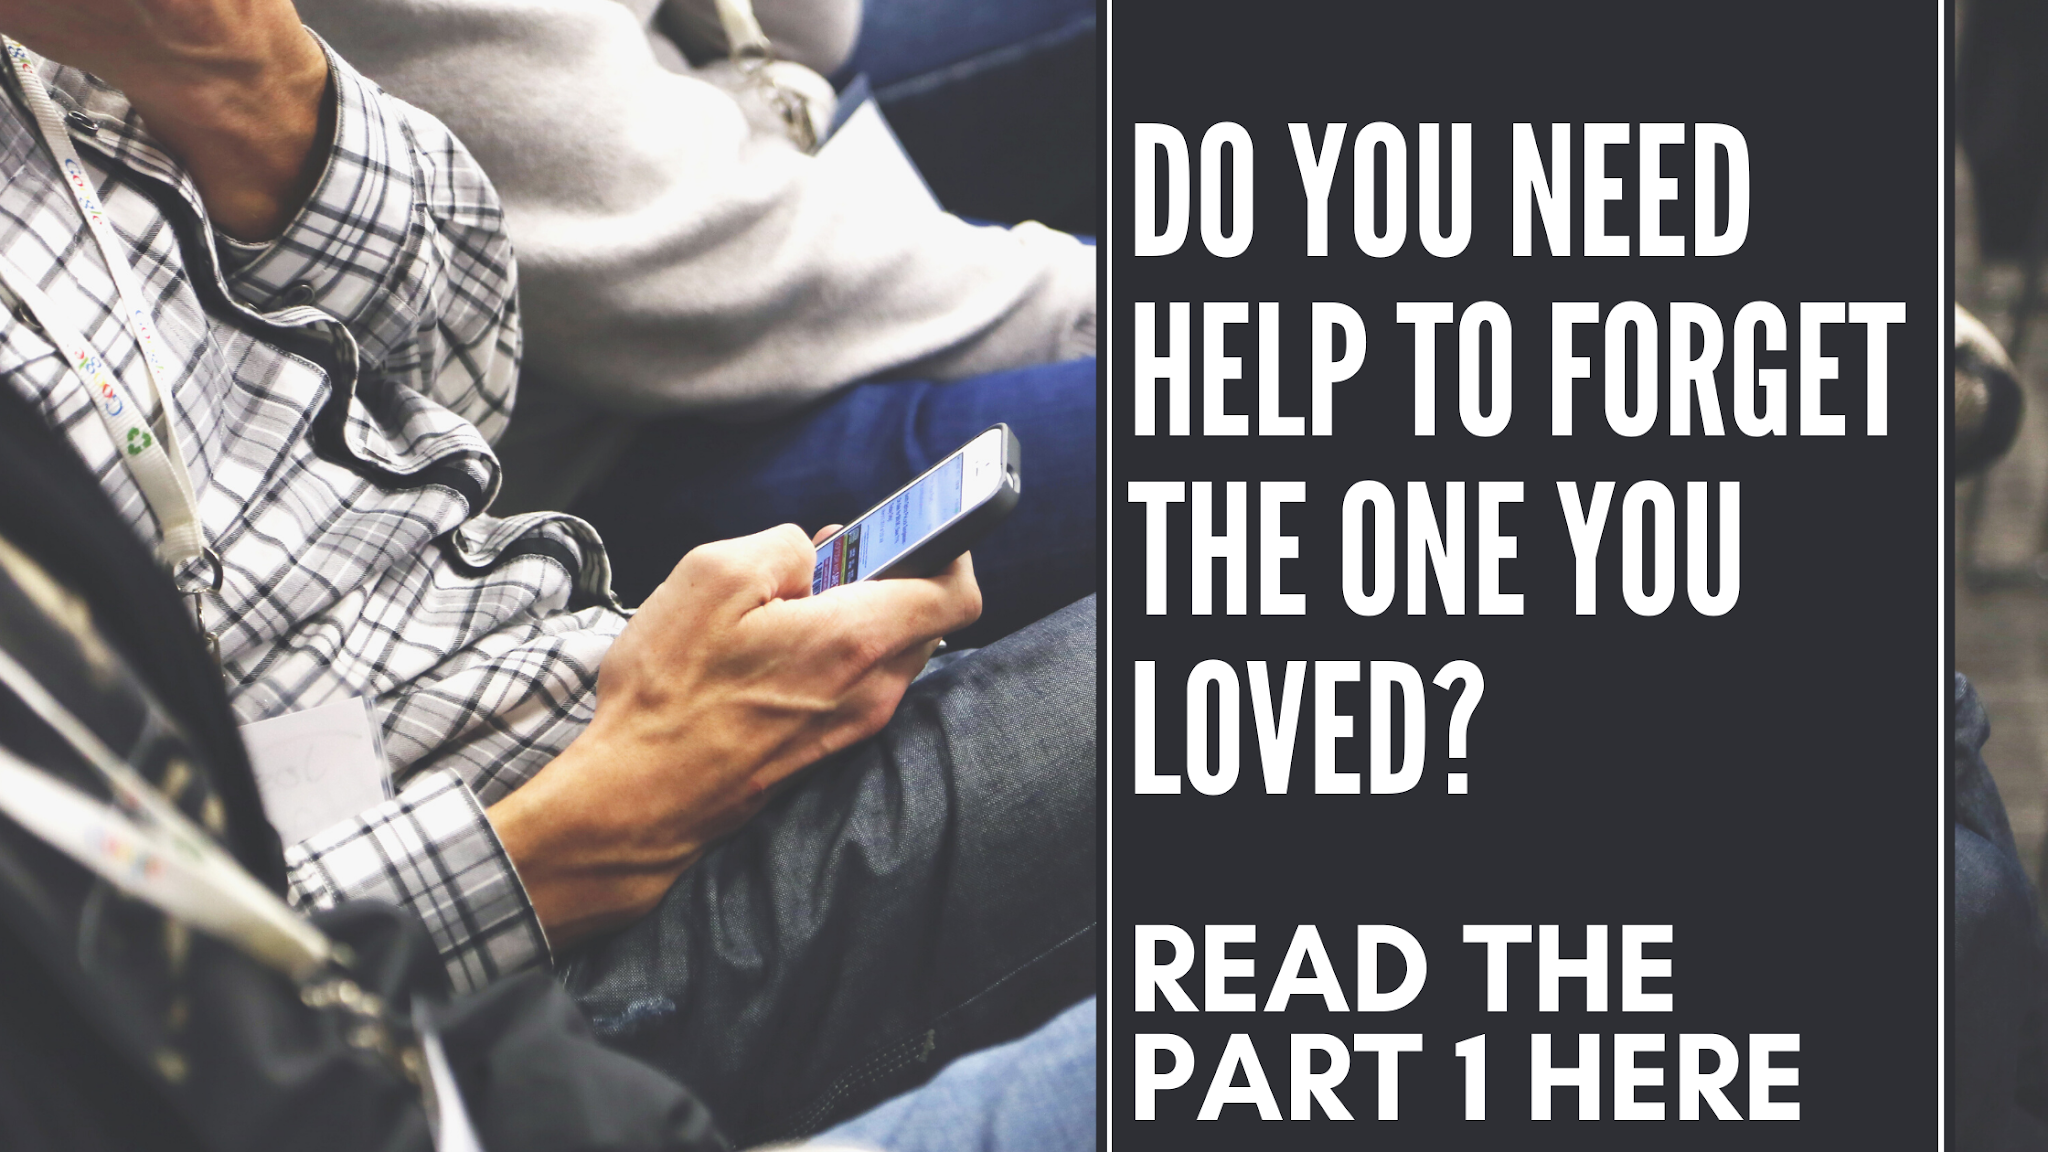 Do you need help to forget the one you LOVED?